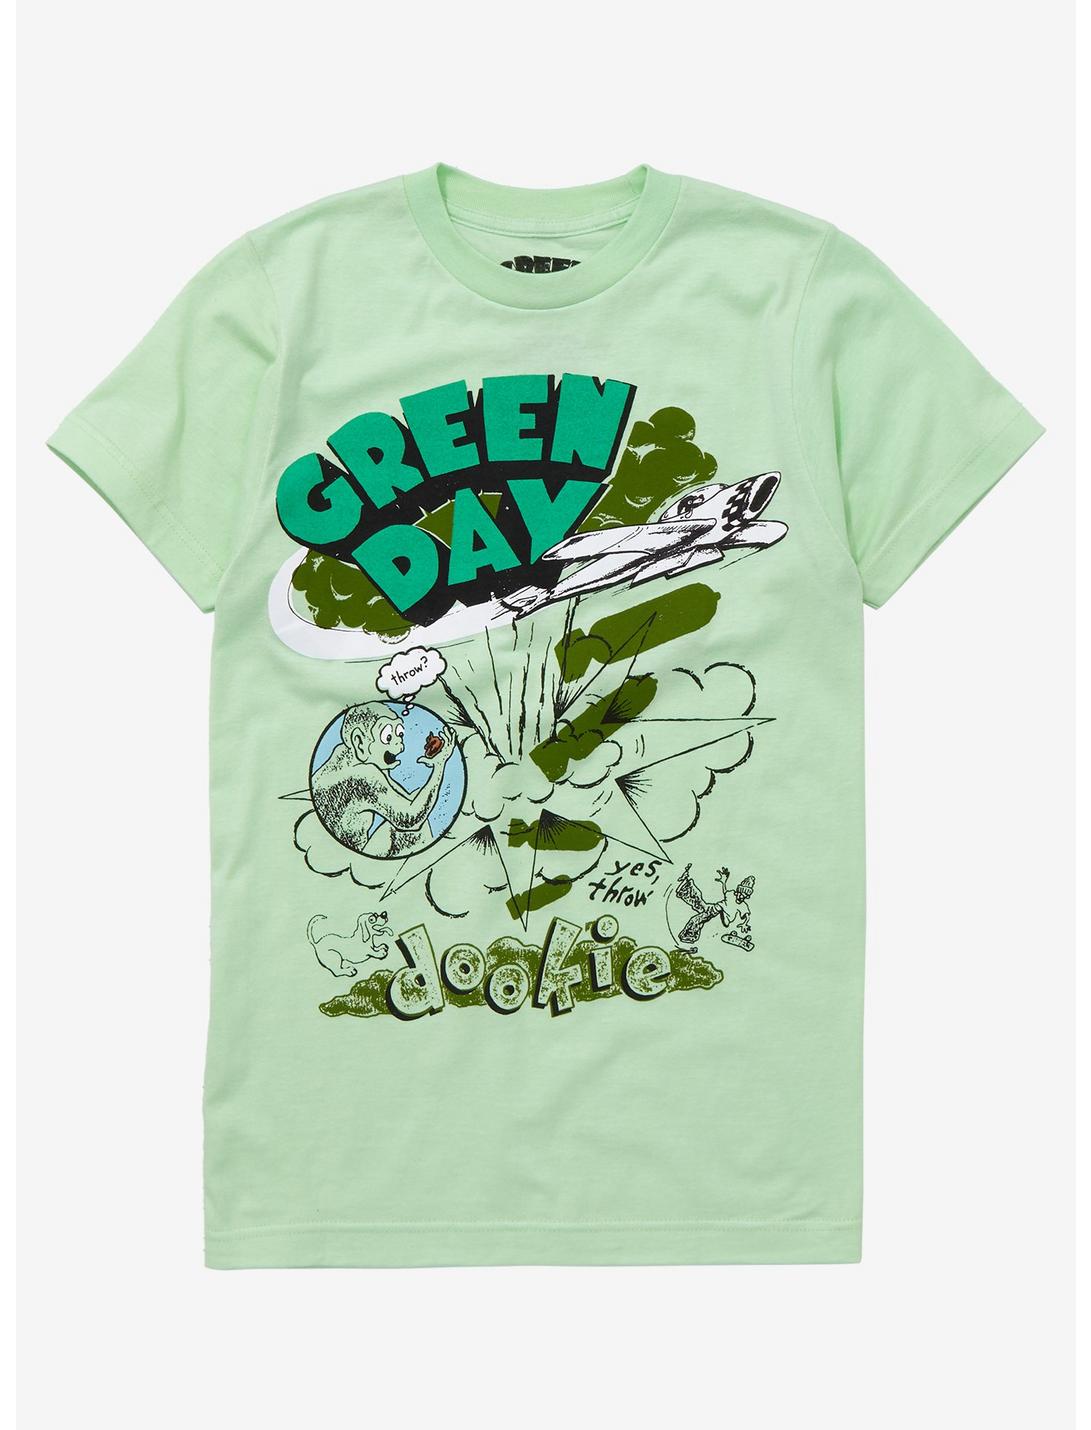 Green Day Dookie Pastel Girls T-Shirt, MINT, hi-res